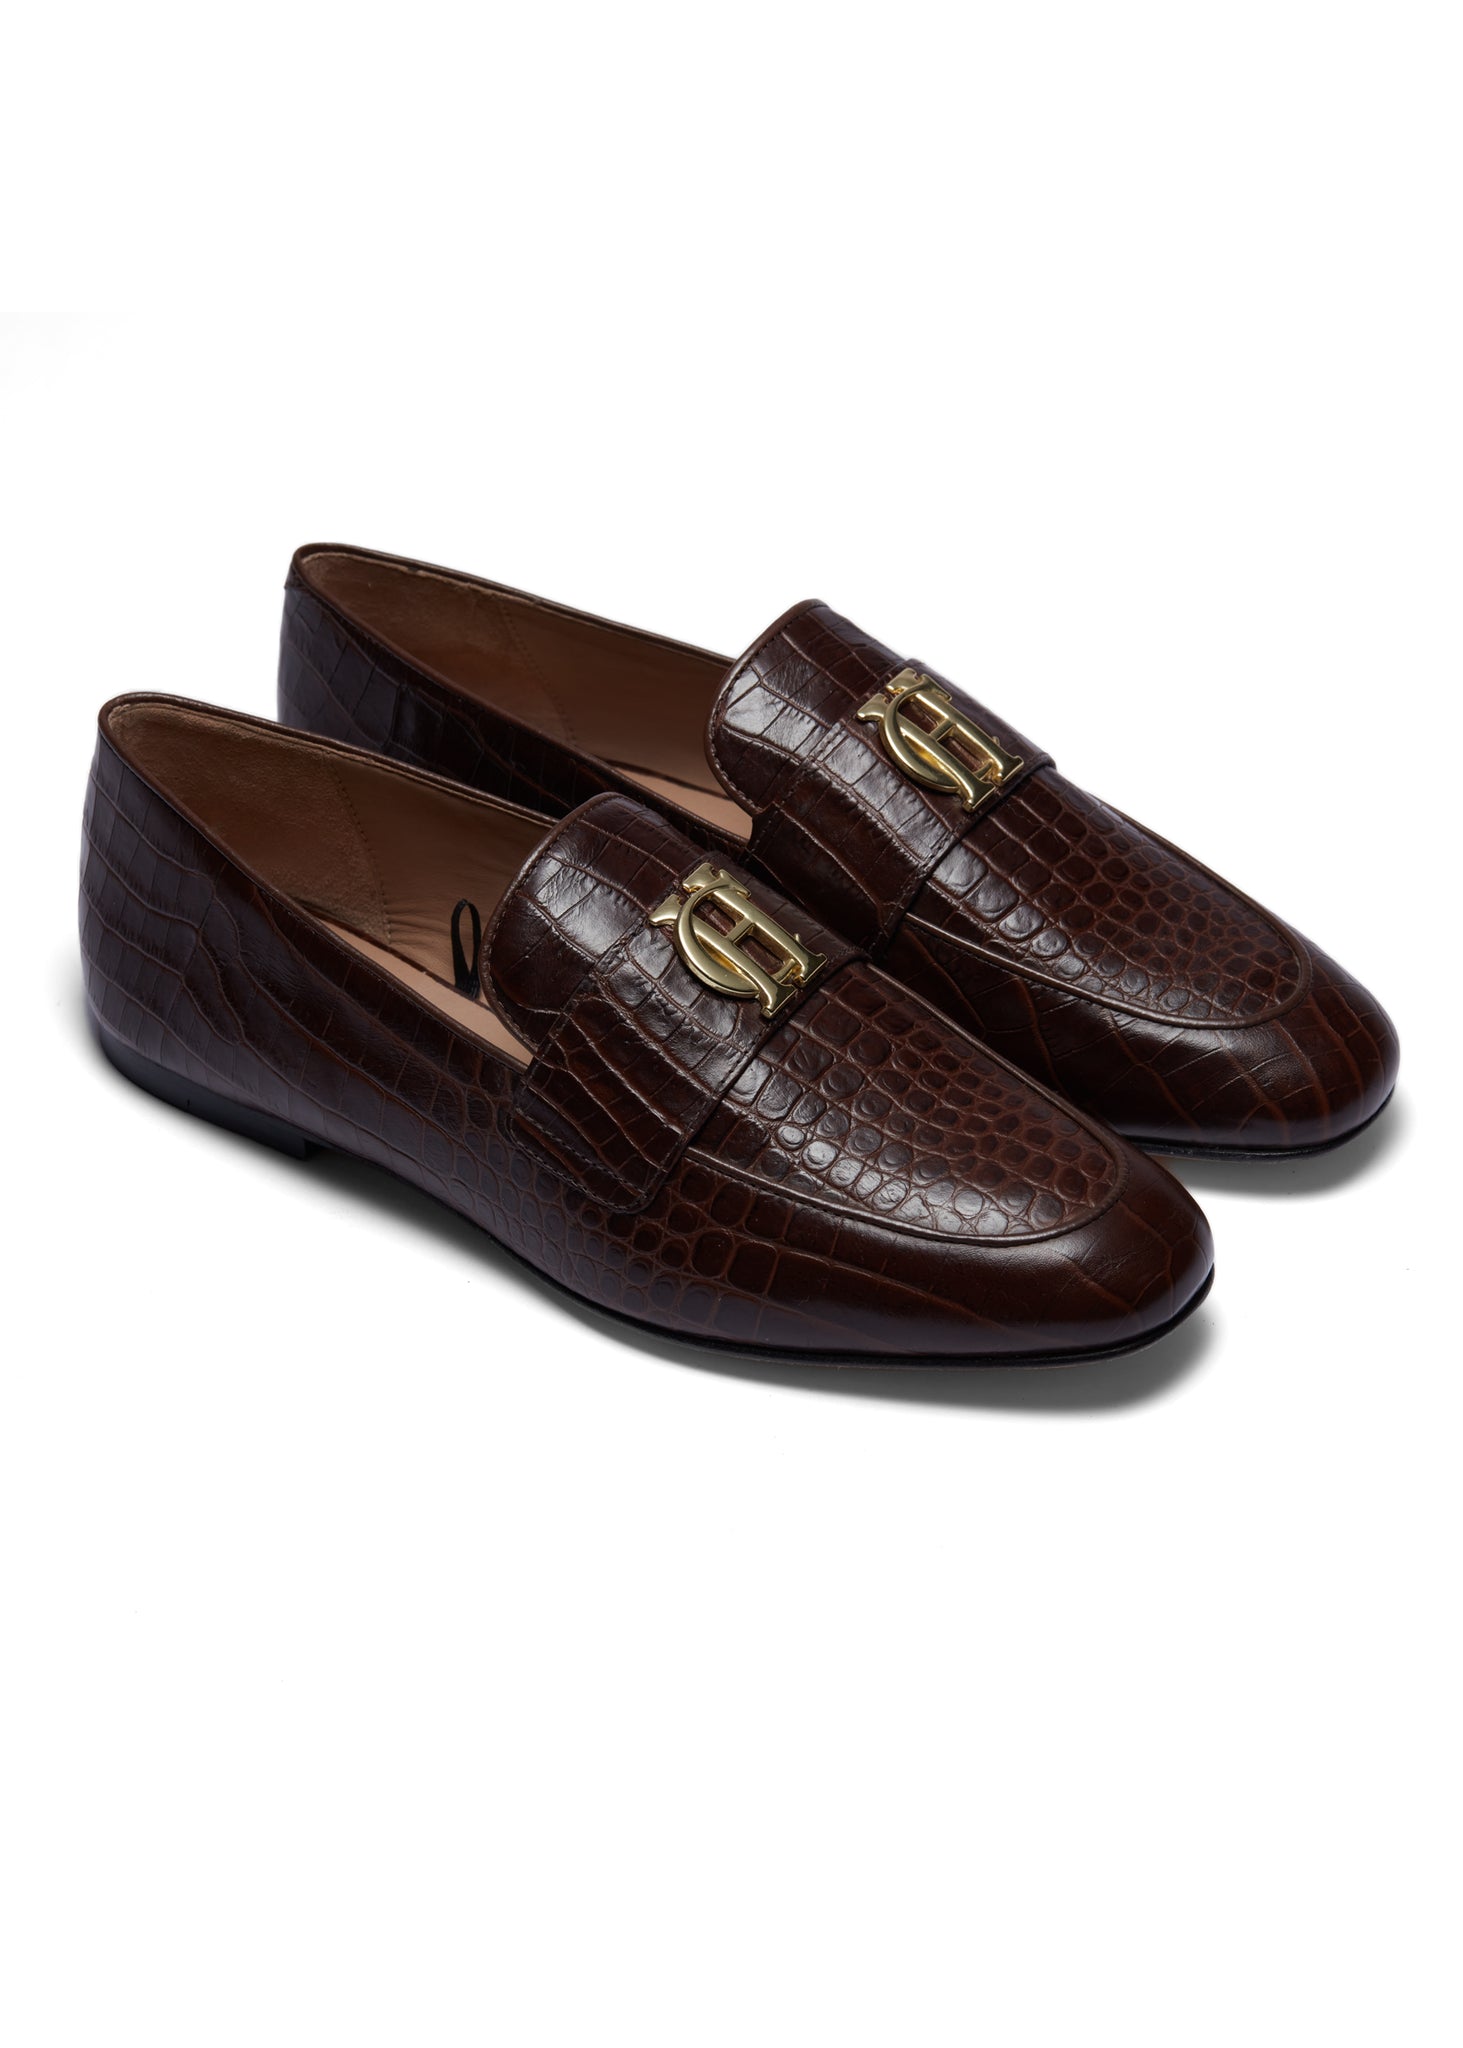 Brown croc embossed leather loafers with a slightly pointed toe and gold hardware to the top